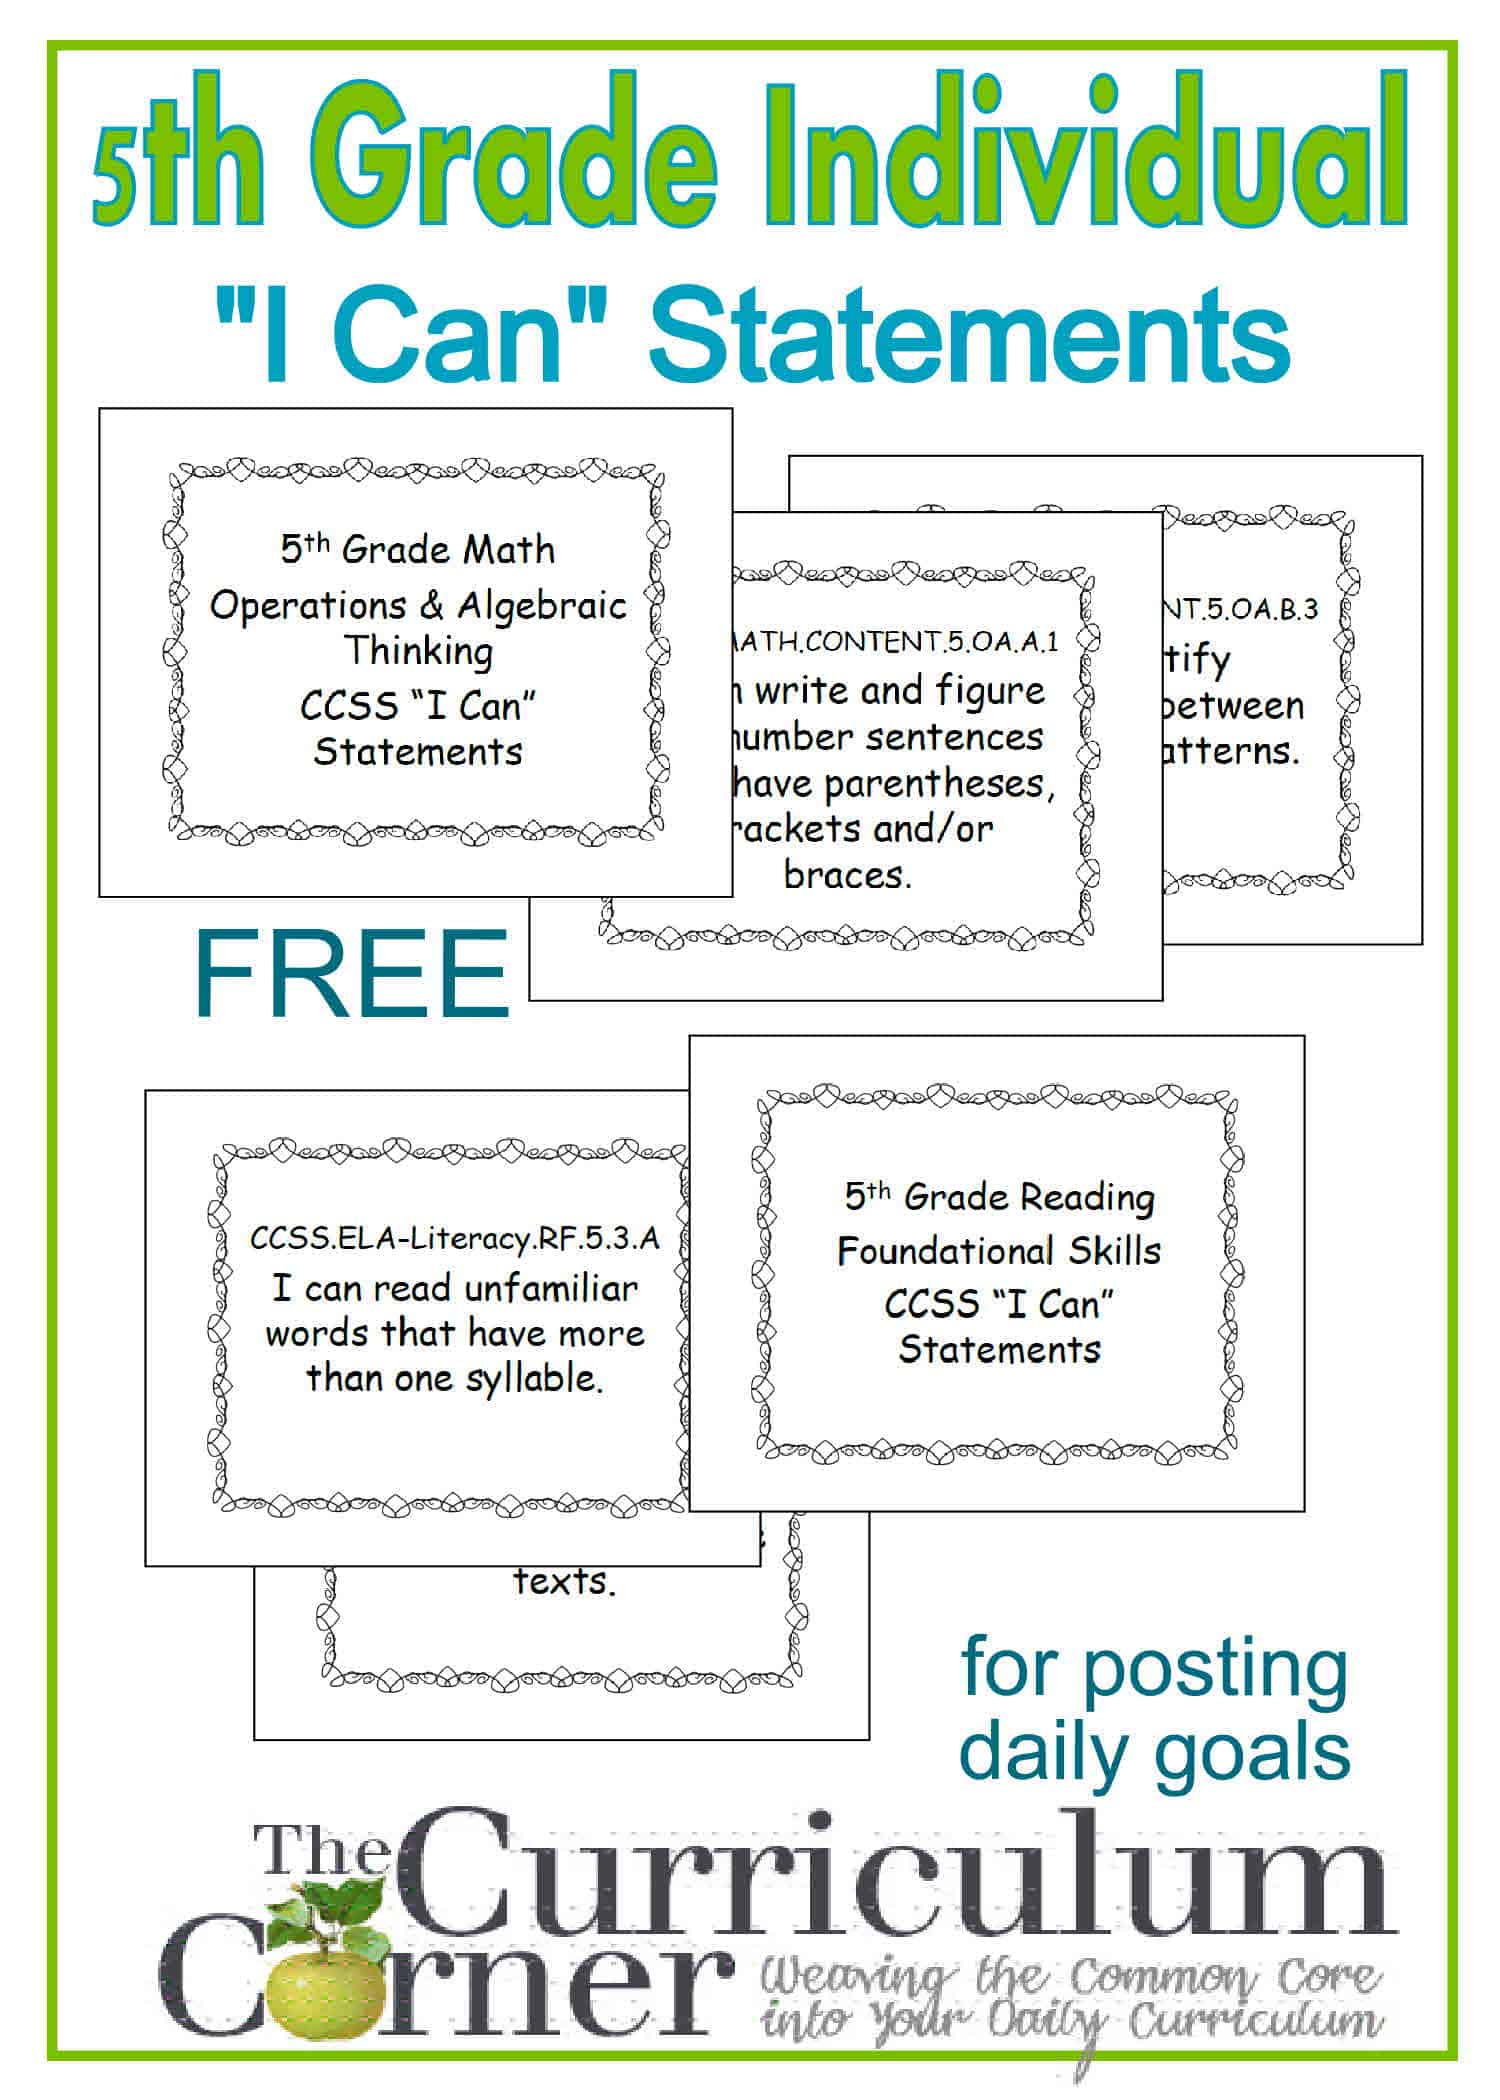 5th Grade Individual "I Can" Statement Posters (One Per Page) - The